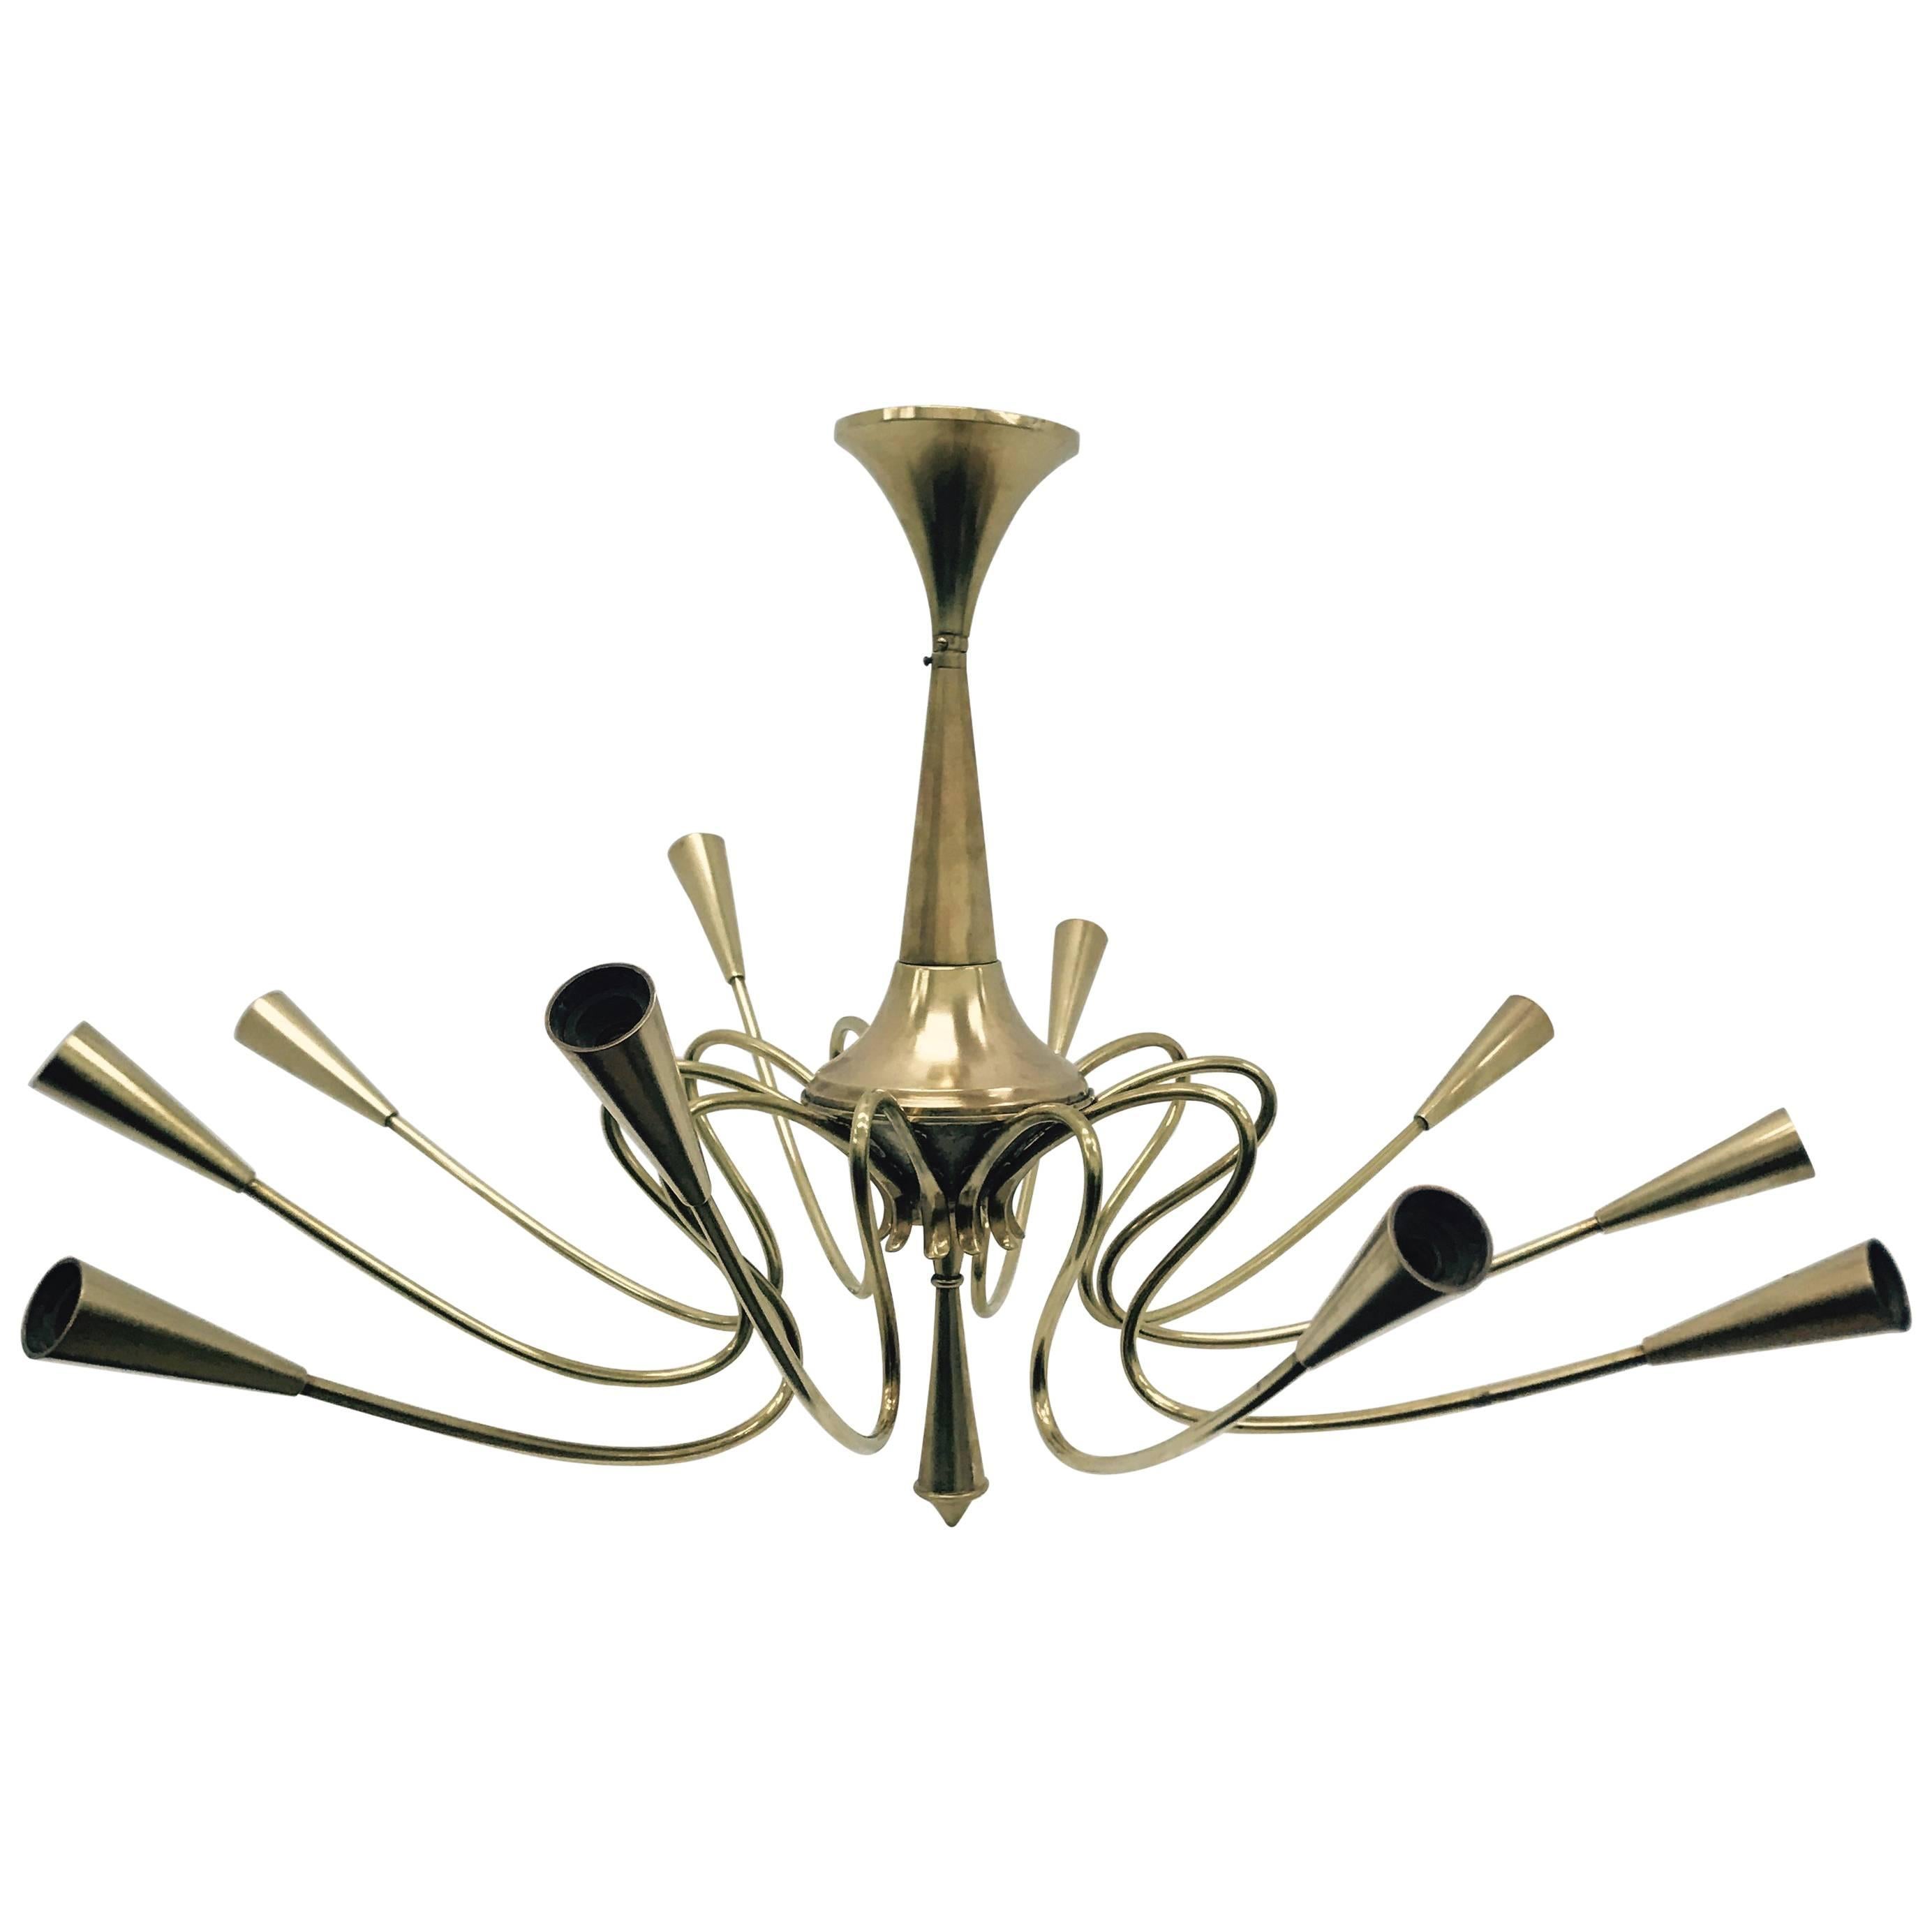 Brass Chandelier by Oscar Torlasco Made in Italy in the 1950s